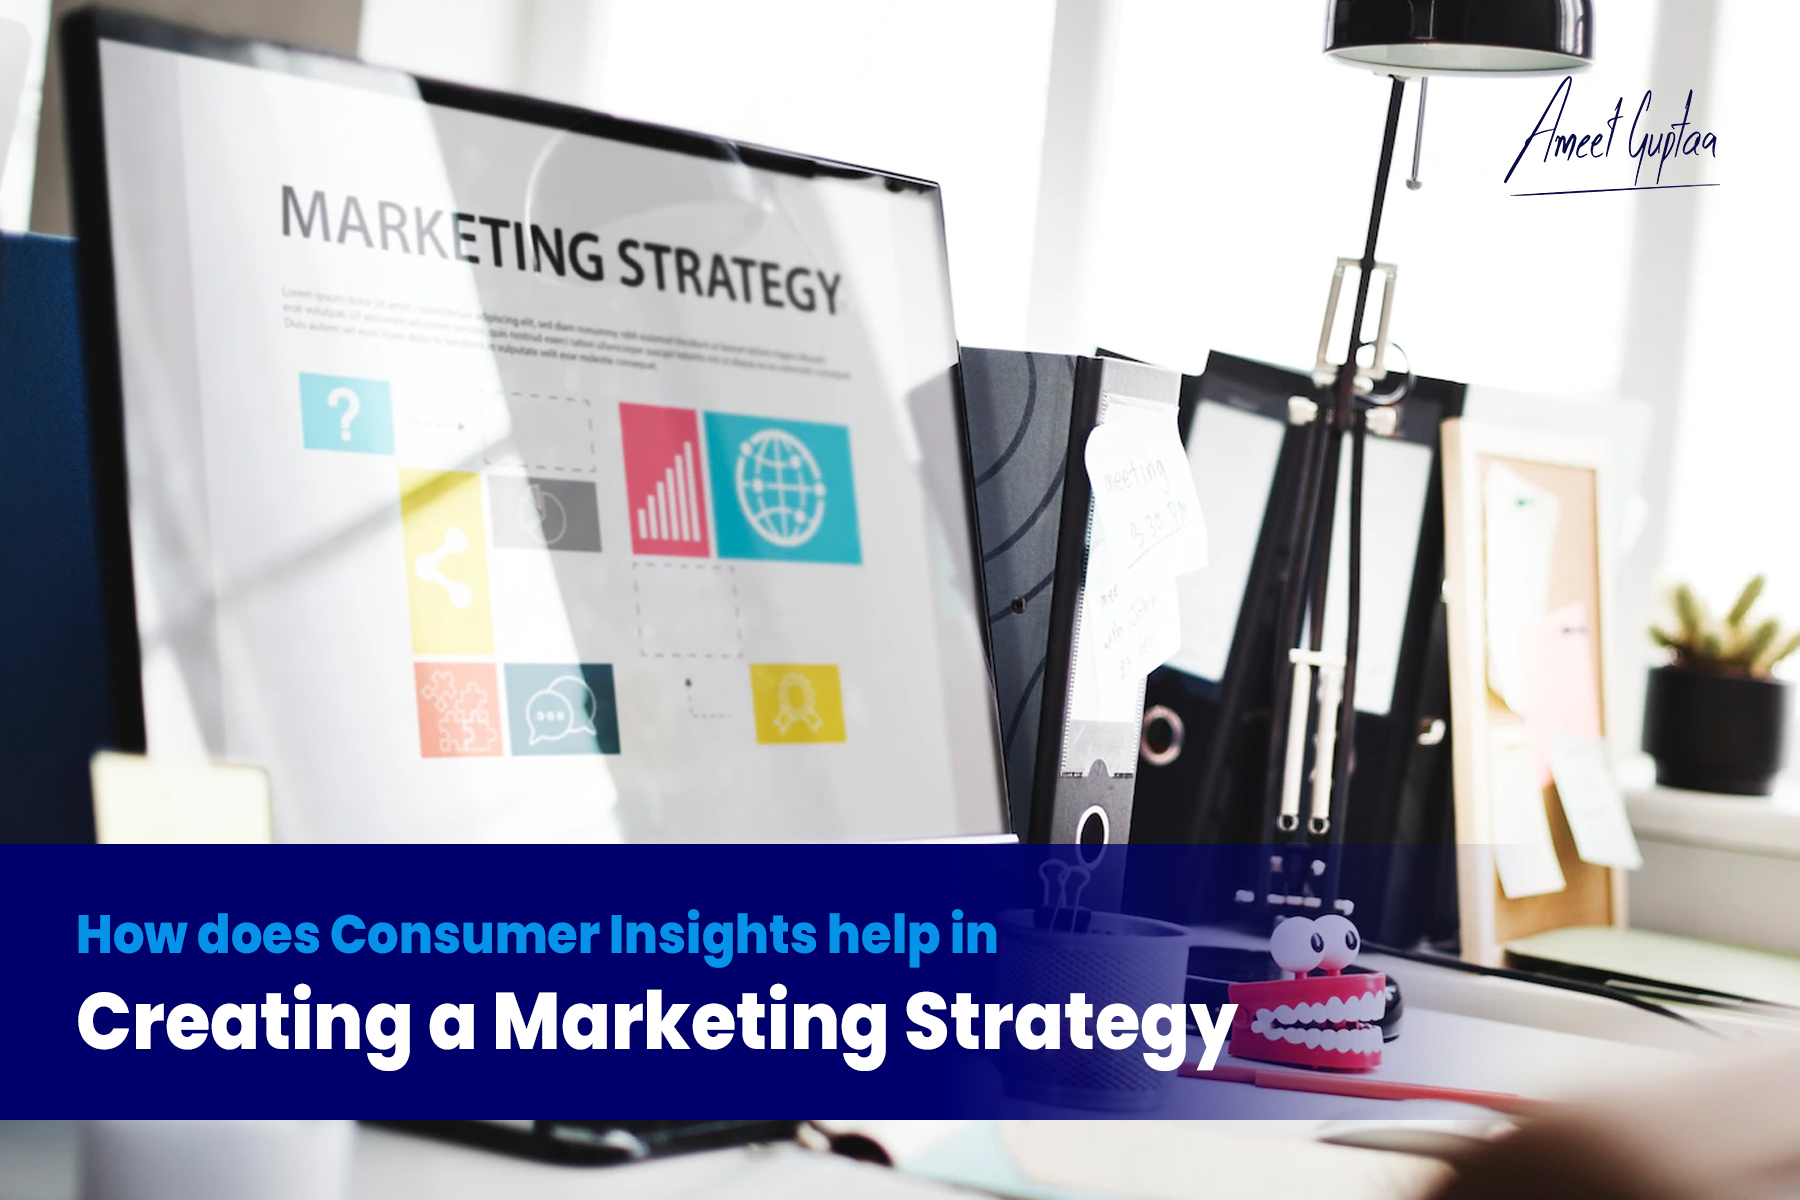 How does Consumer Insights help in creating a Marketing Strategy?